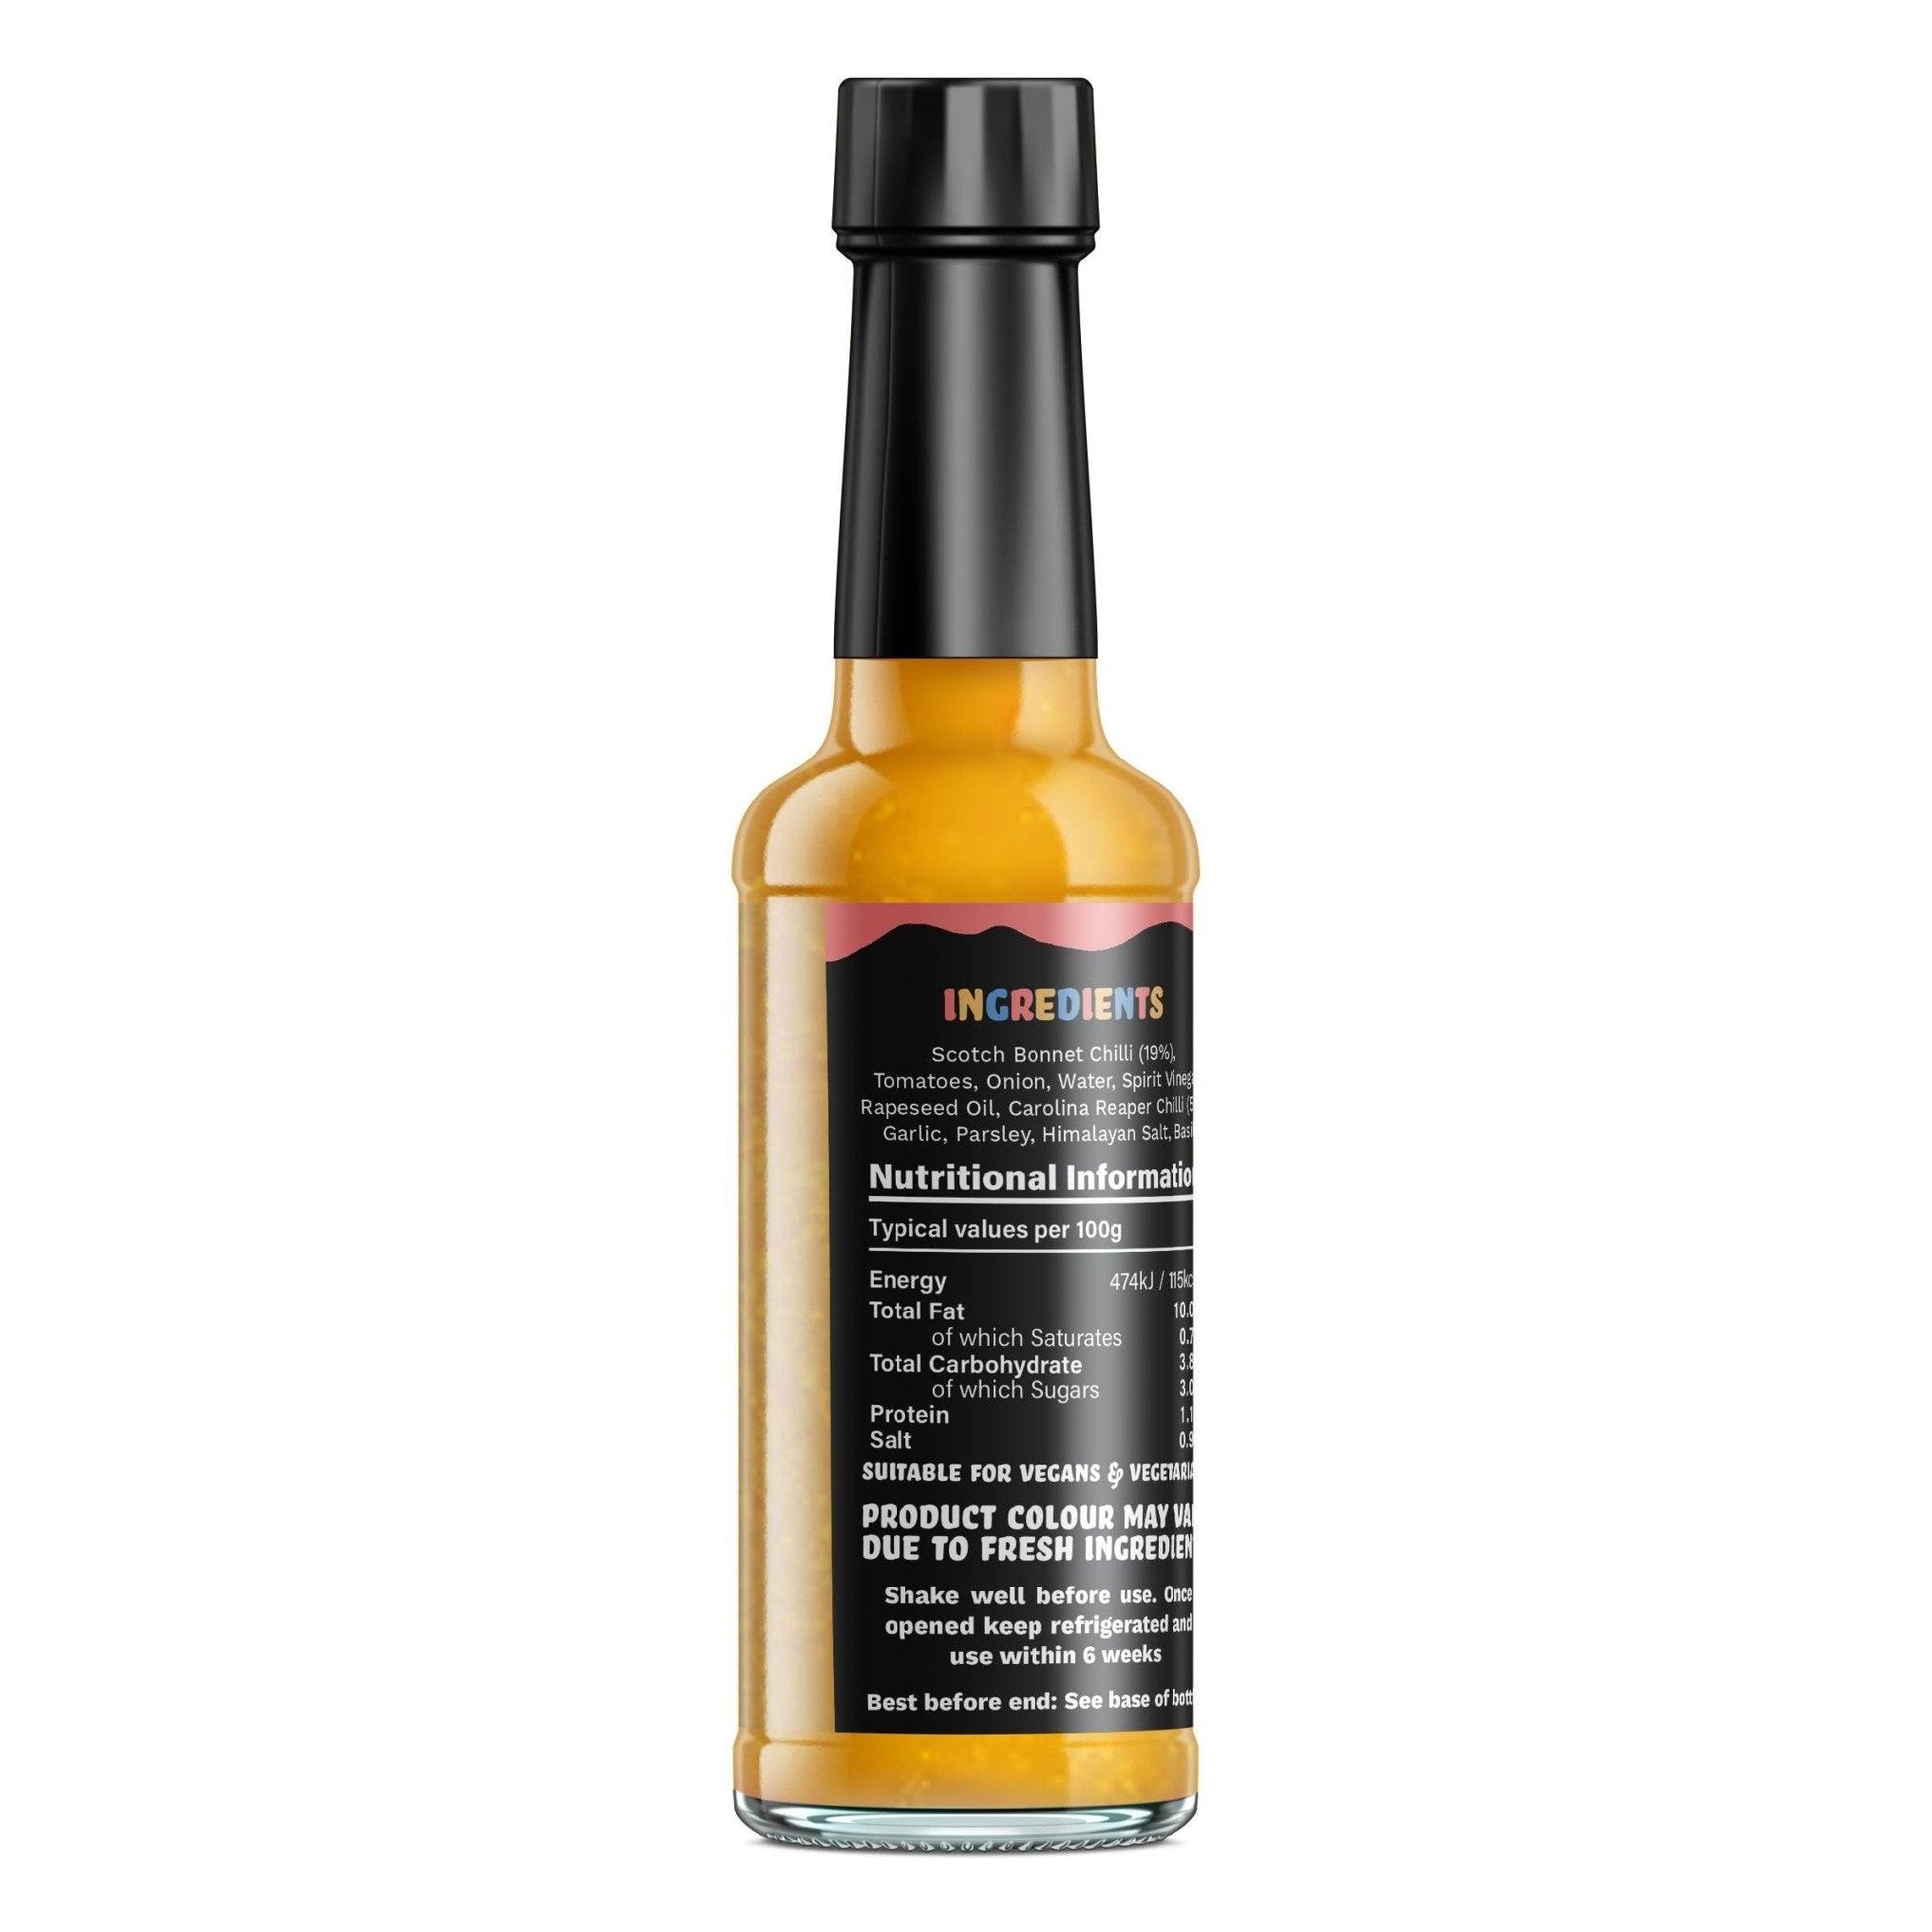 Brixton Reaper Hot Sauce | 150ml | Lazy Scientist - One Stop Chilli Shop